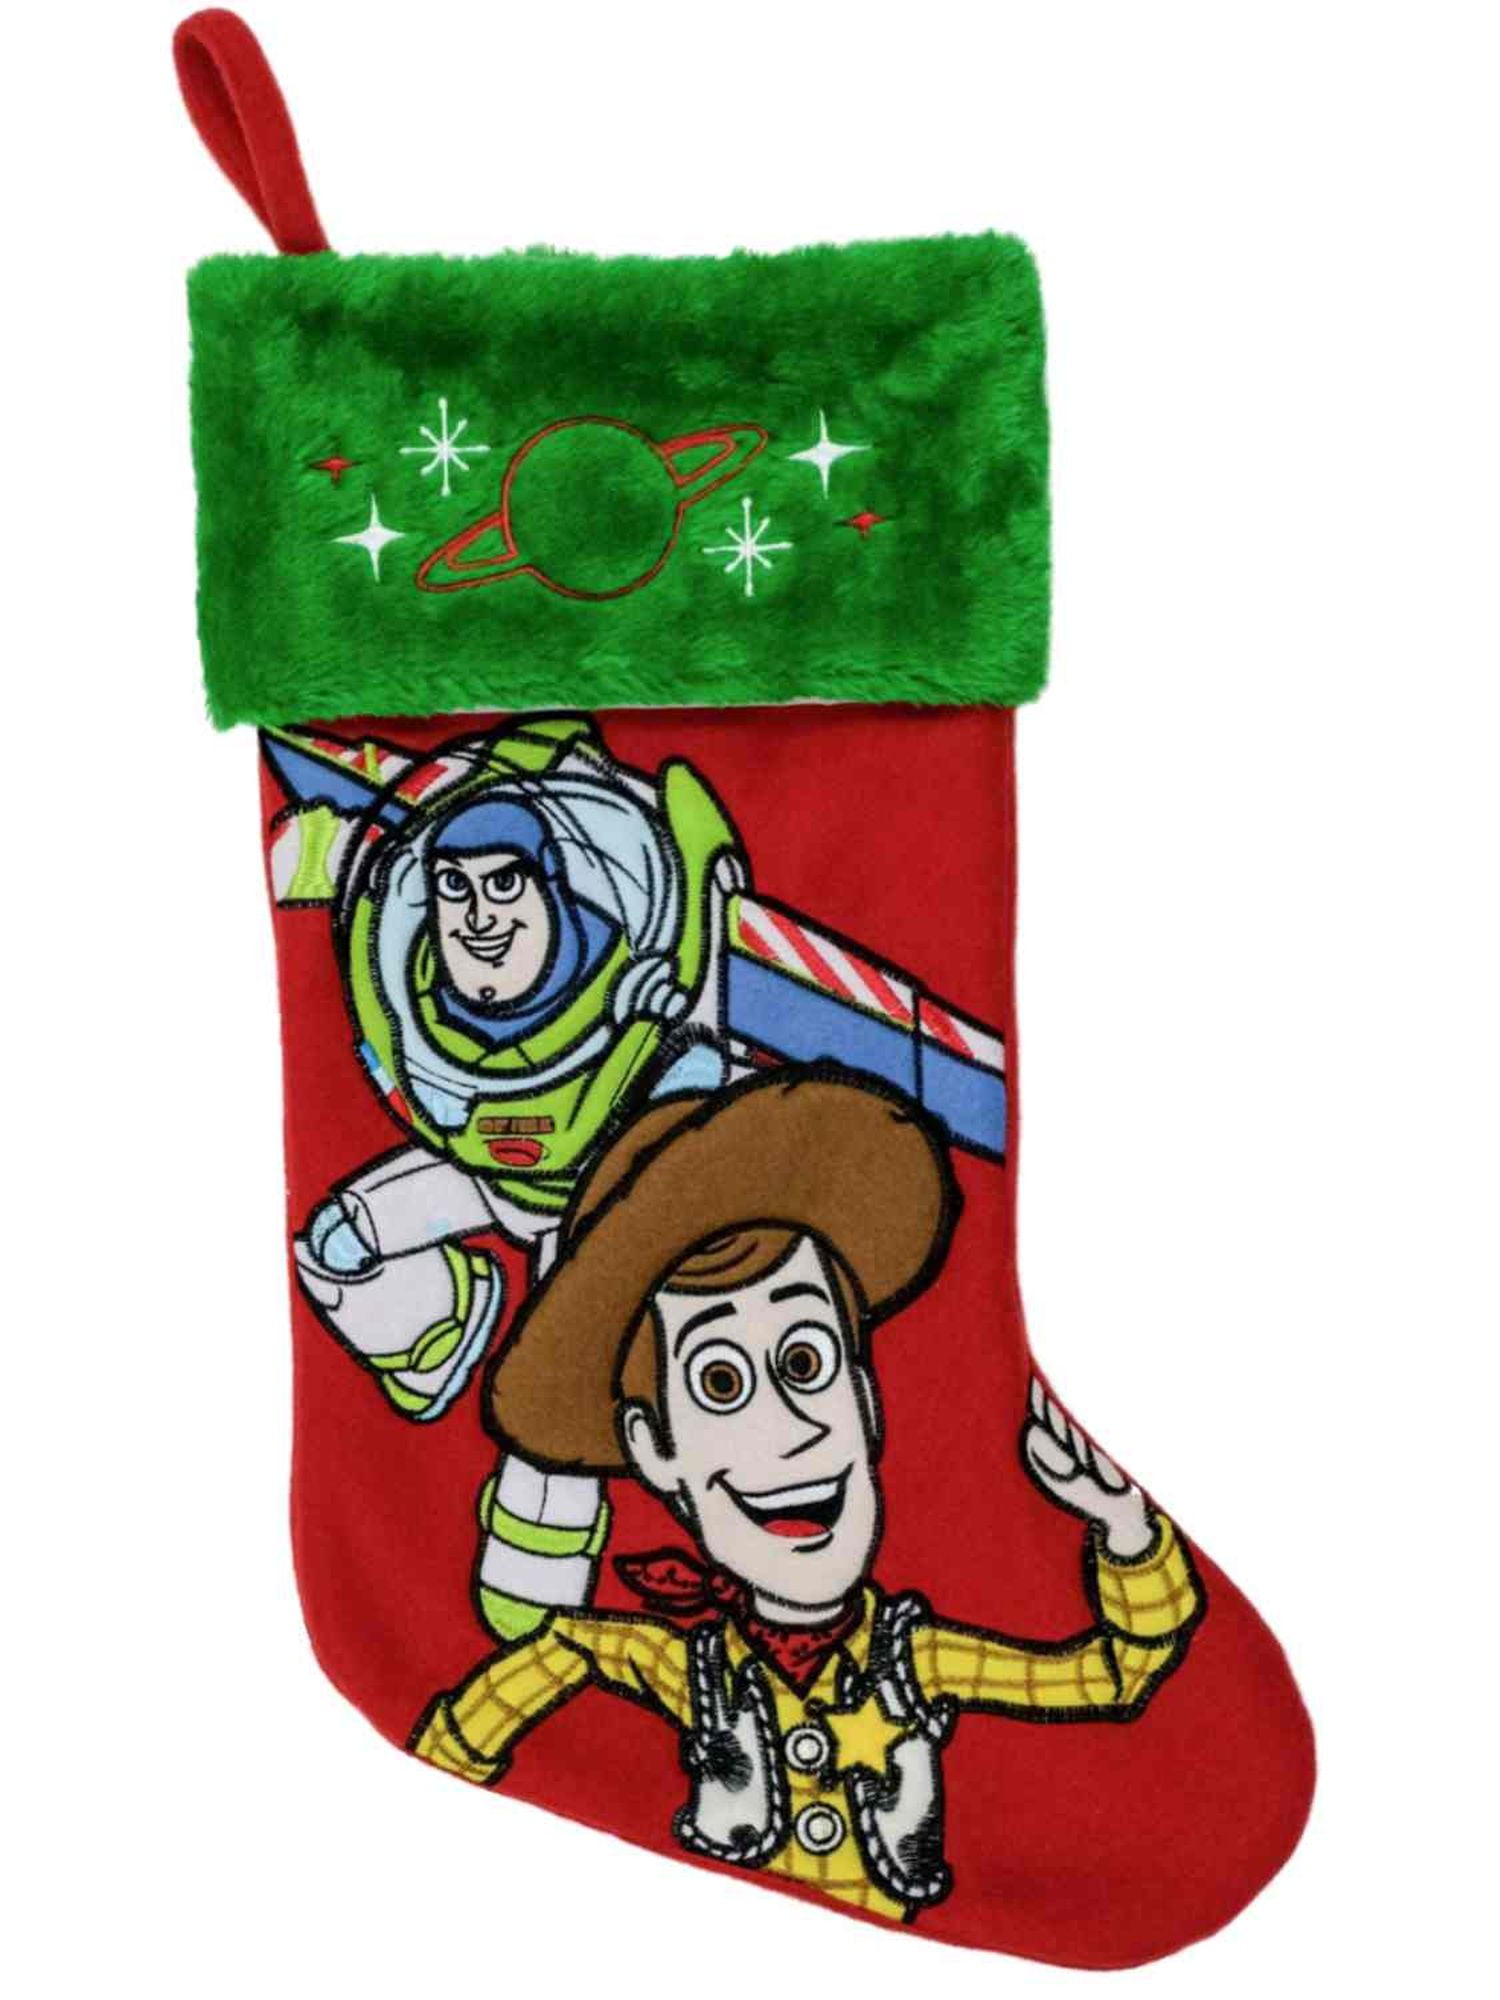 Disney Toy Story 4 Christmas Stocking 19” Buzz Lightyear Woody Embroidered New 